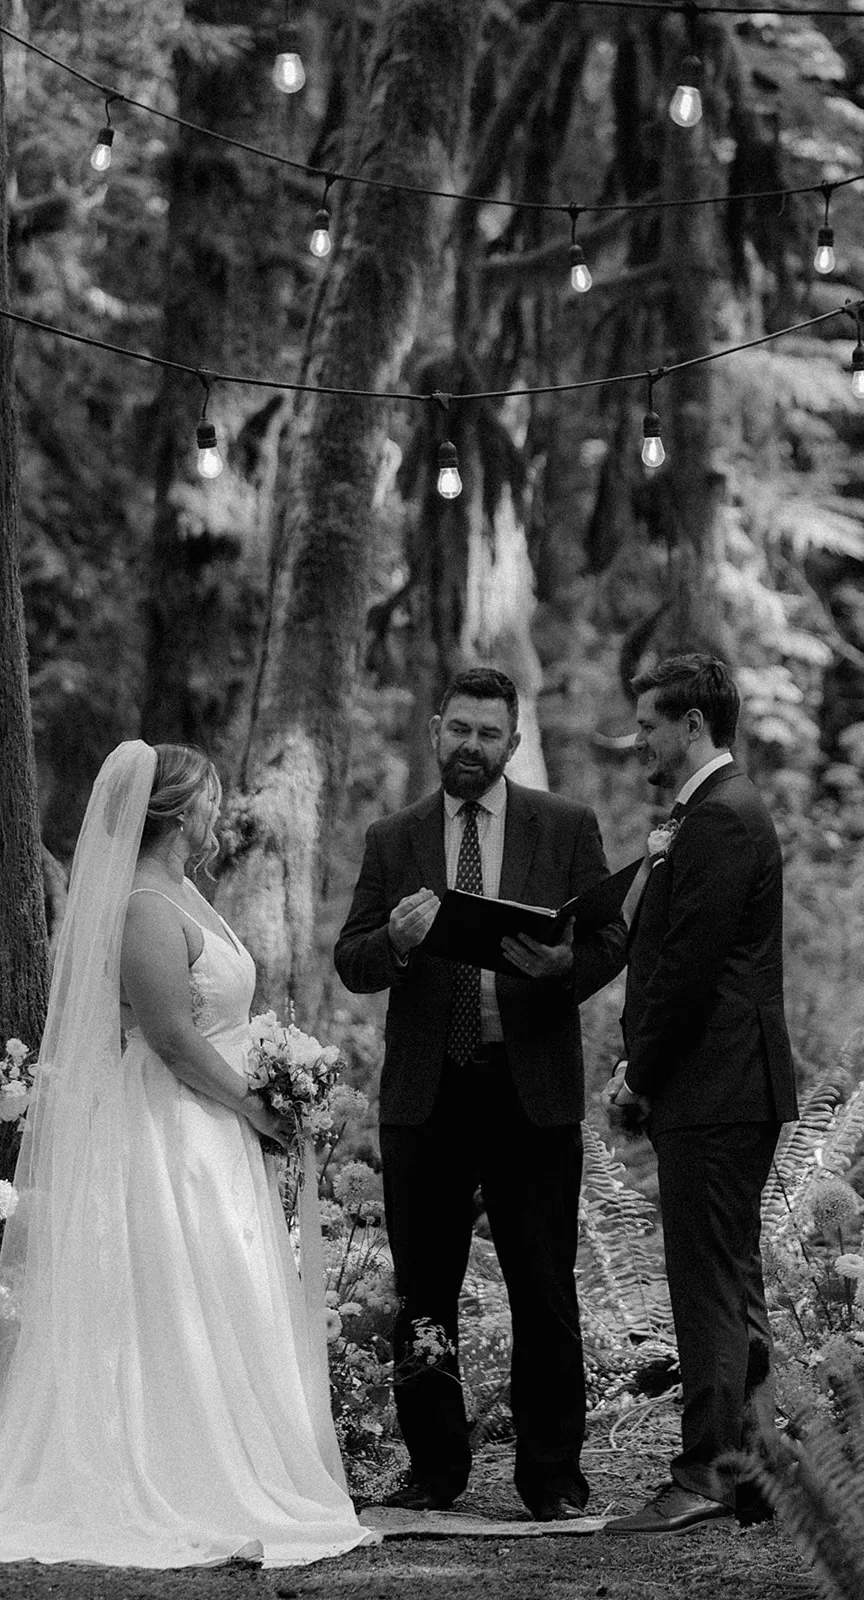 Elyssa + Tim with Officiant Curt during their wedding ceremony